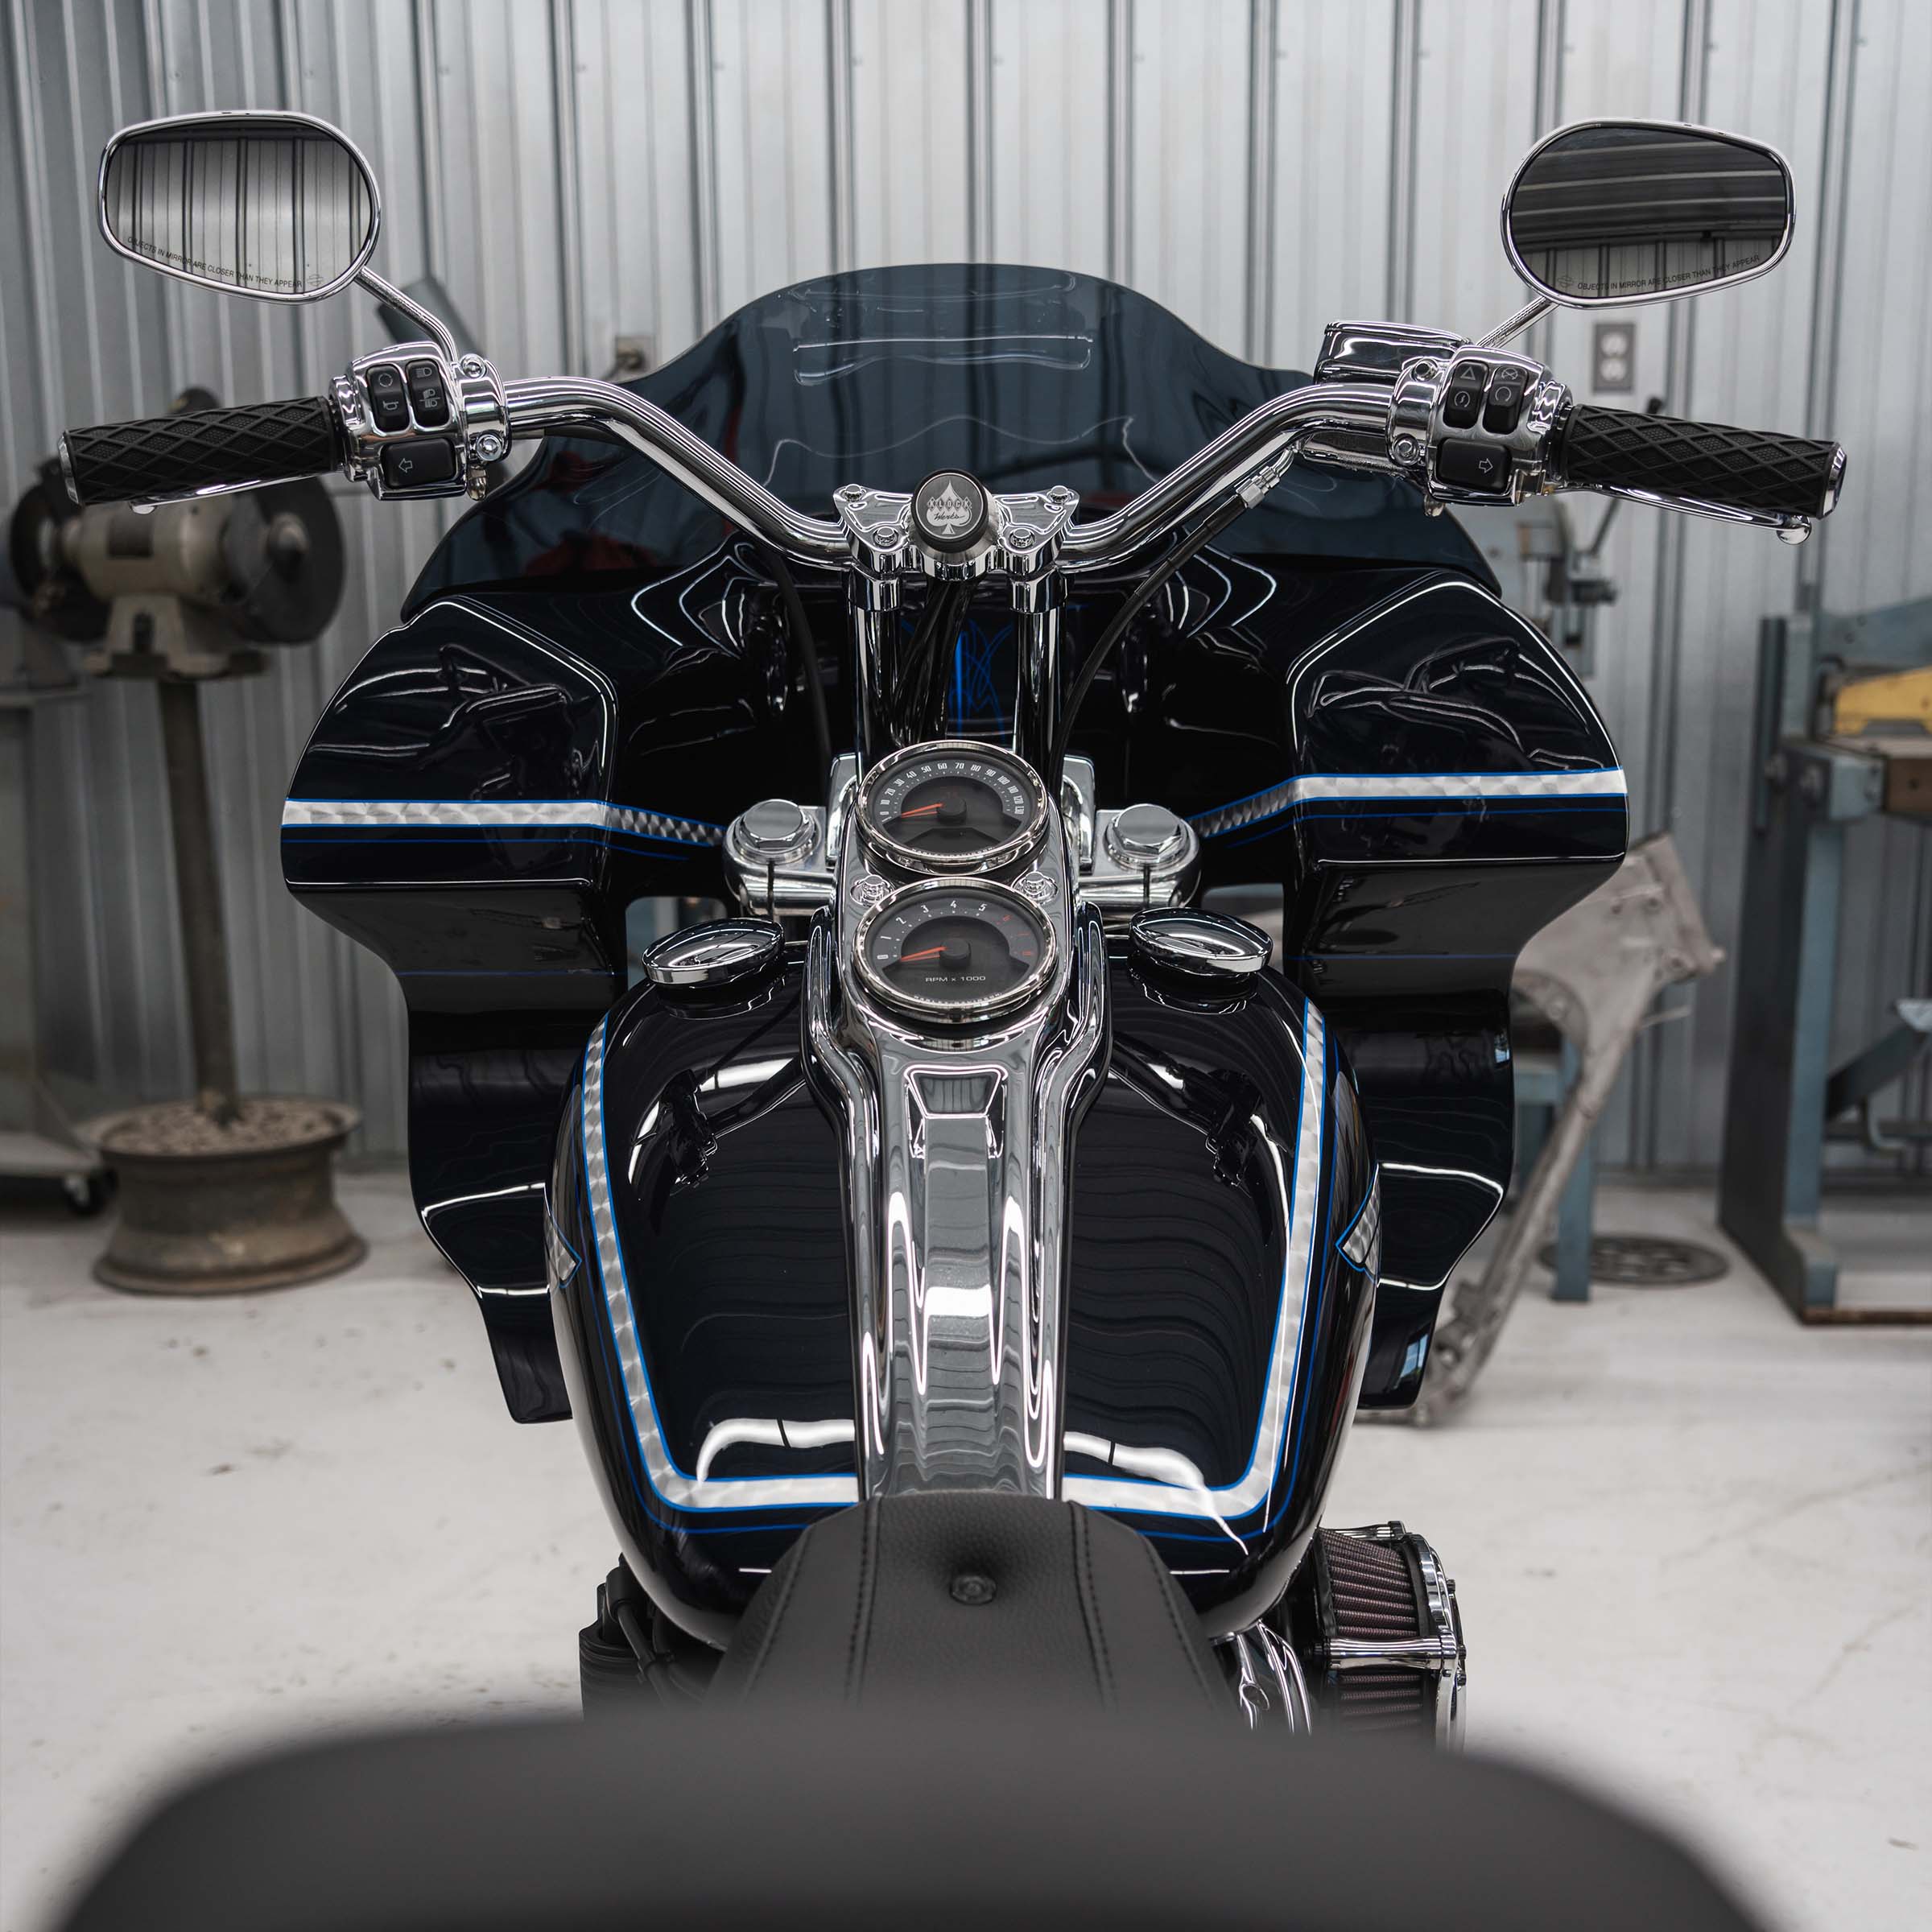 Harley-Davidson FXRP Fairing Fit Kit for Softail Motorcycles showing completed fairing on bike (H-D M8 Softail)